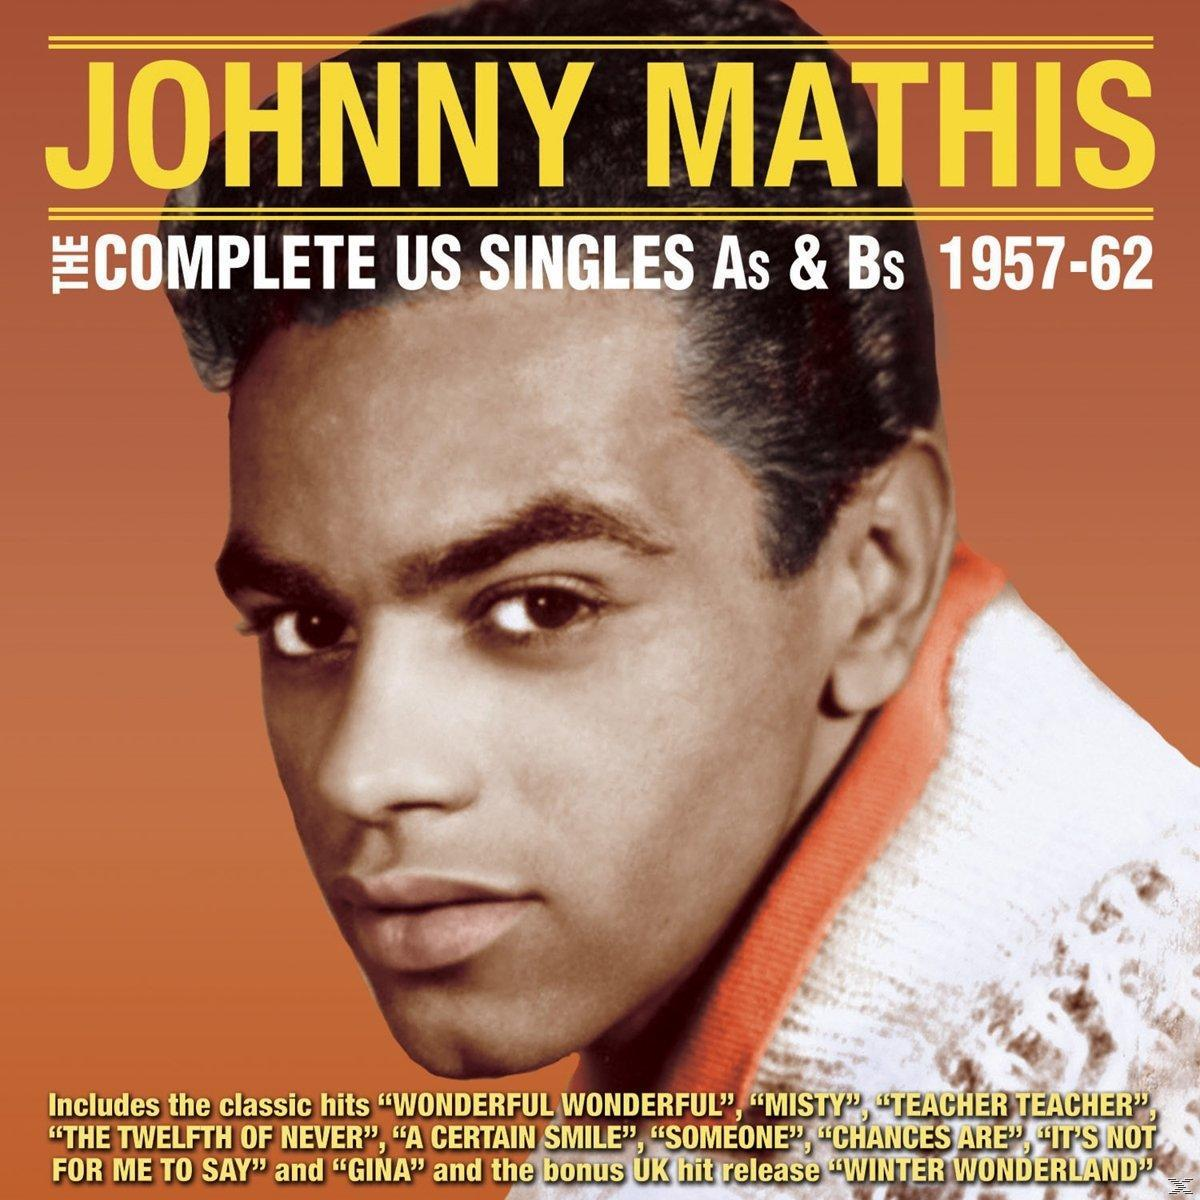 Singles Complete - Bs 1957-62 The & (CD) As Johnny - Mathis US